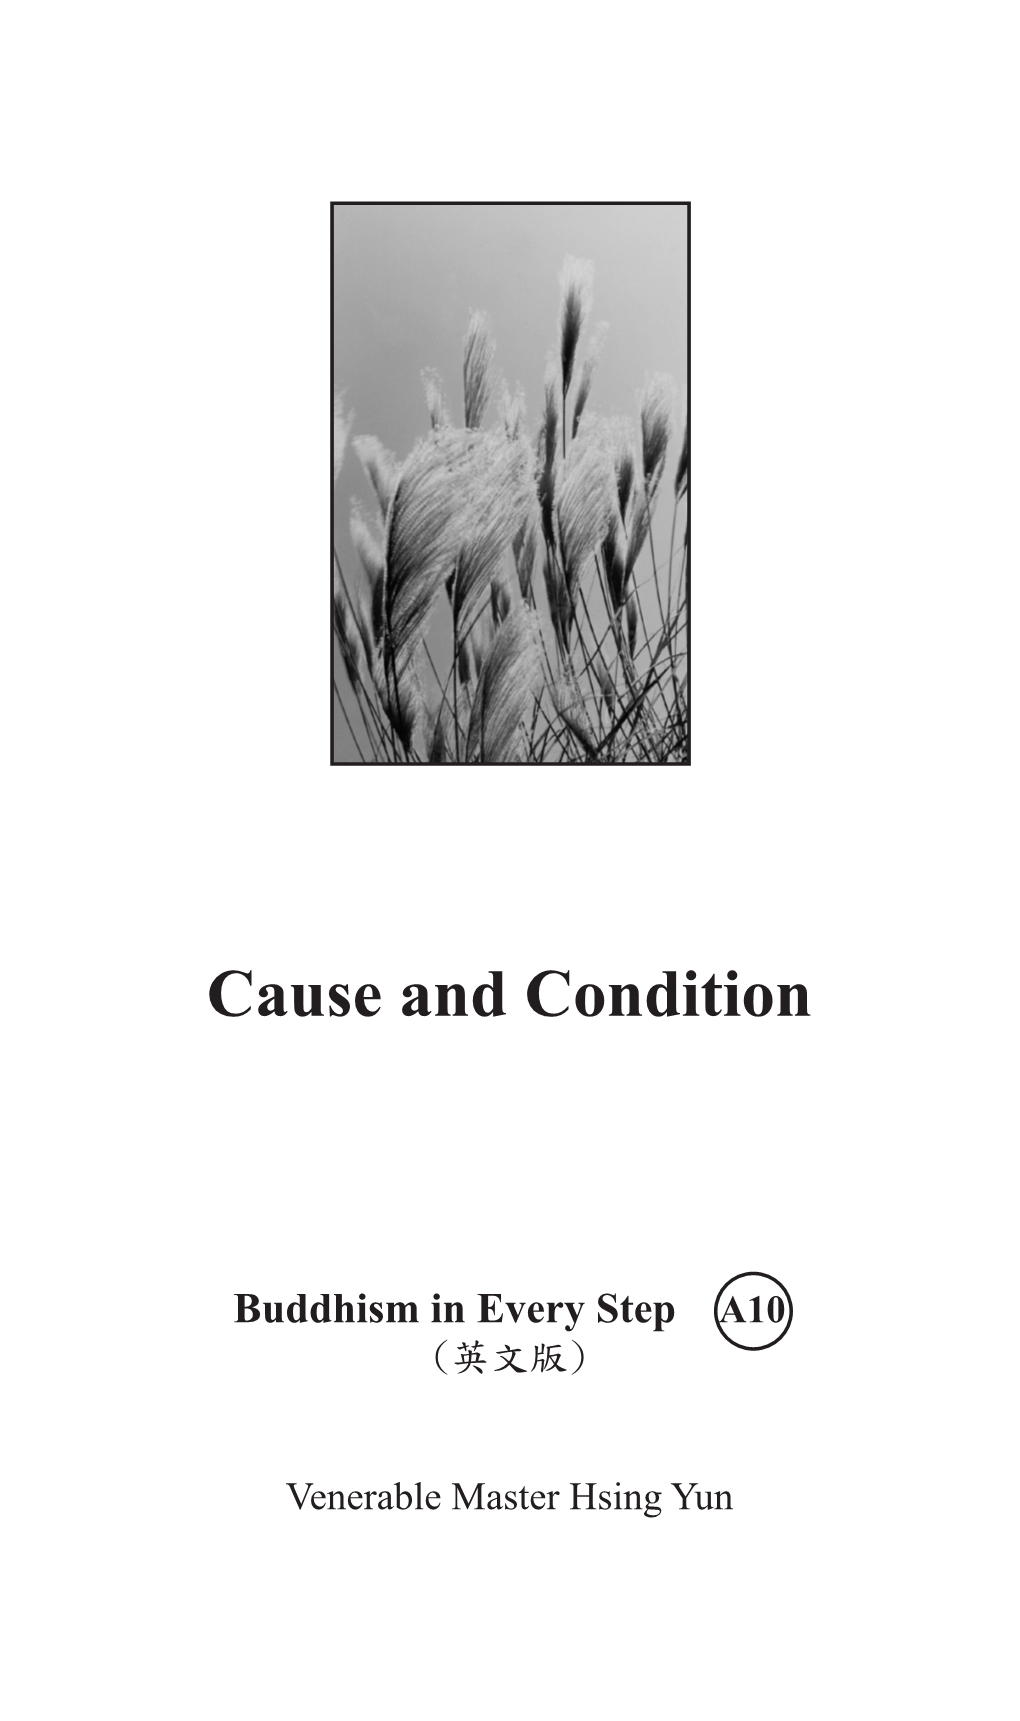 Cause and Condition